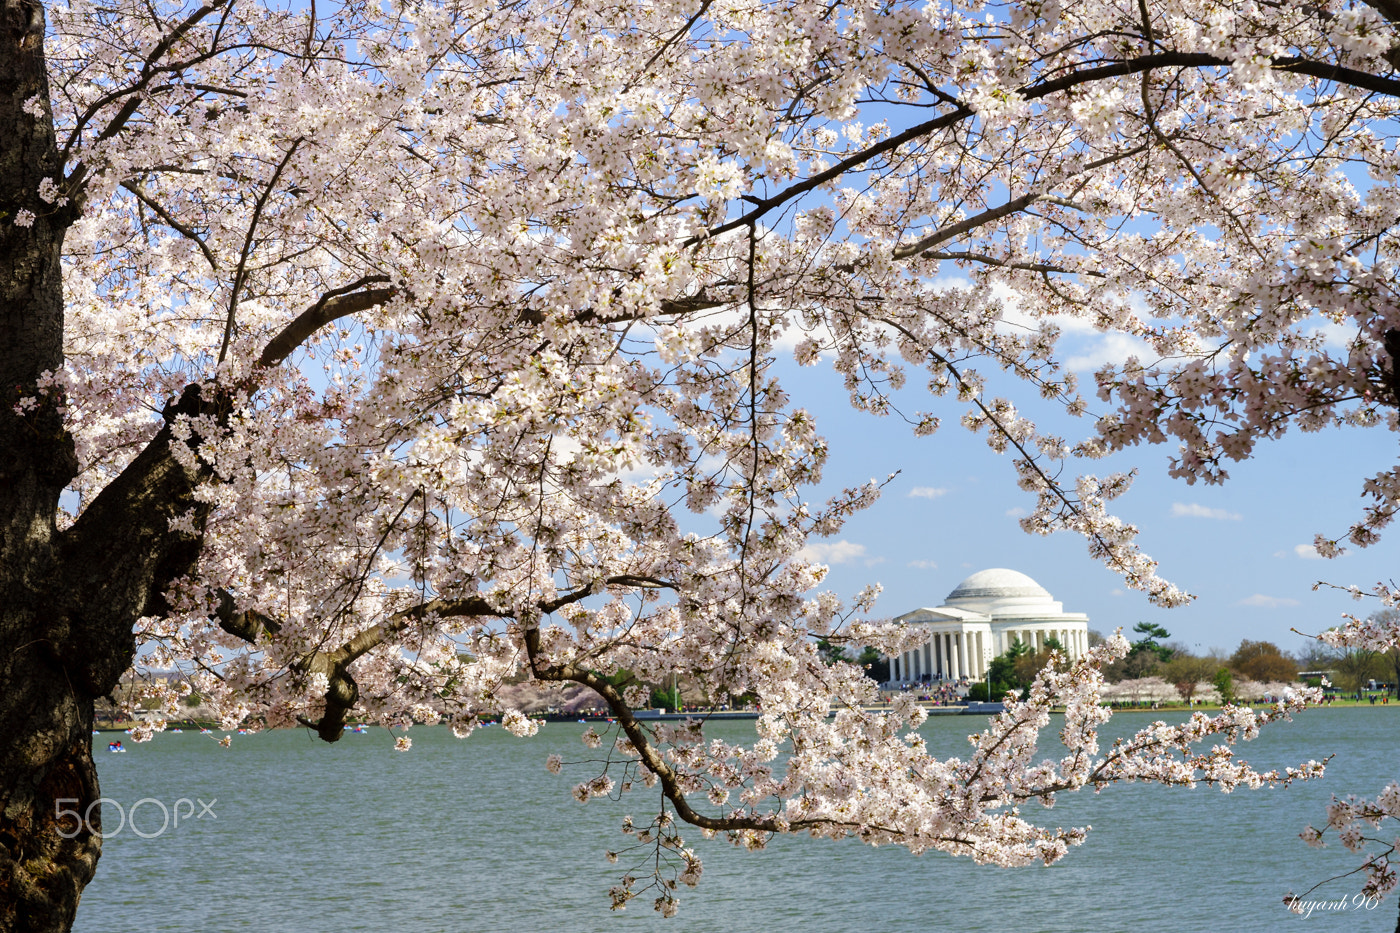 Hasselblad HV sample photo. Cherry blossom and jefferson memorial photography